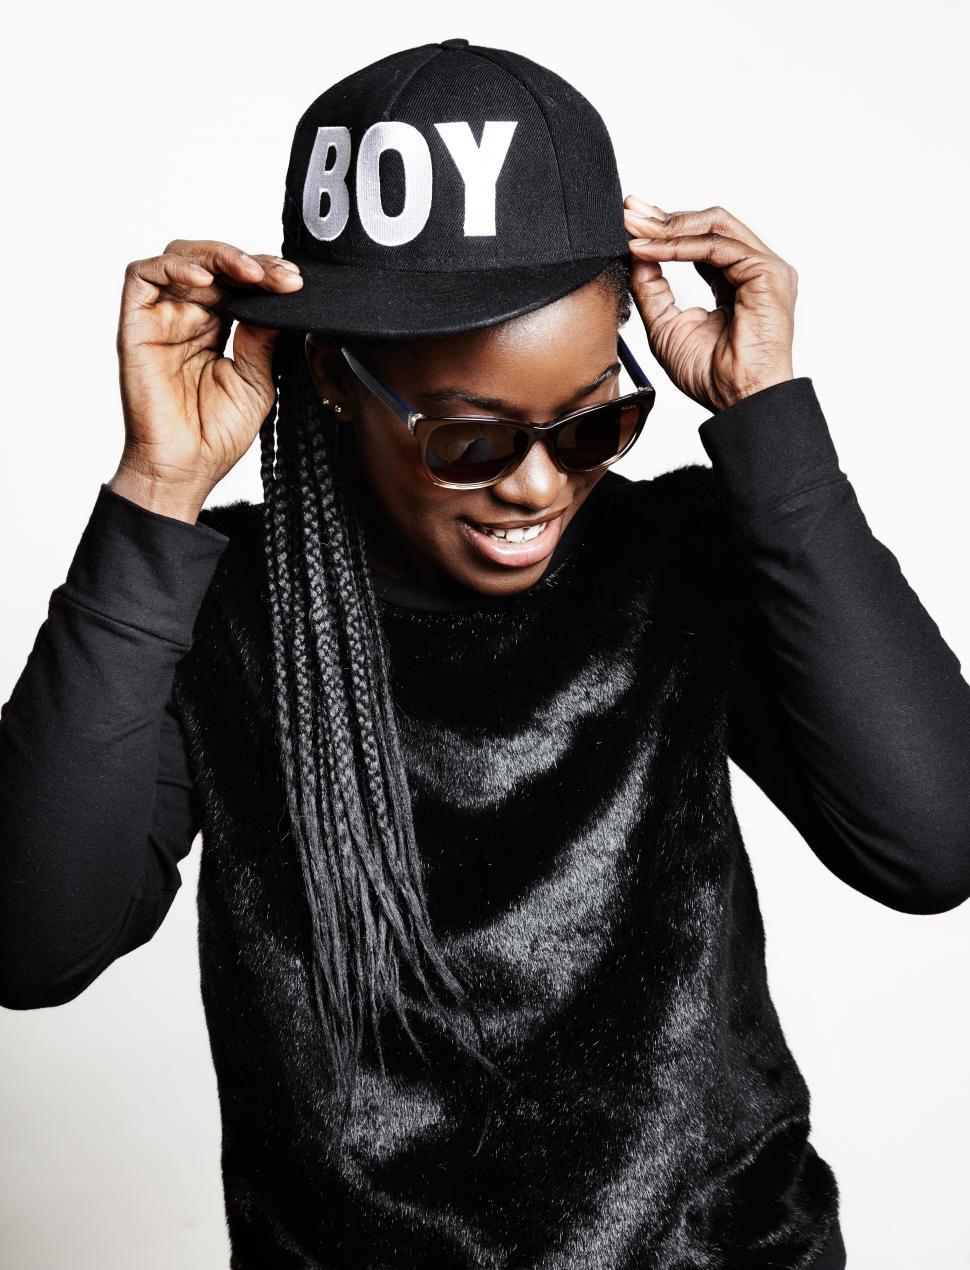 Free Image of Stylish black woman in sunglasses touching a cap 